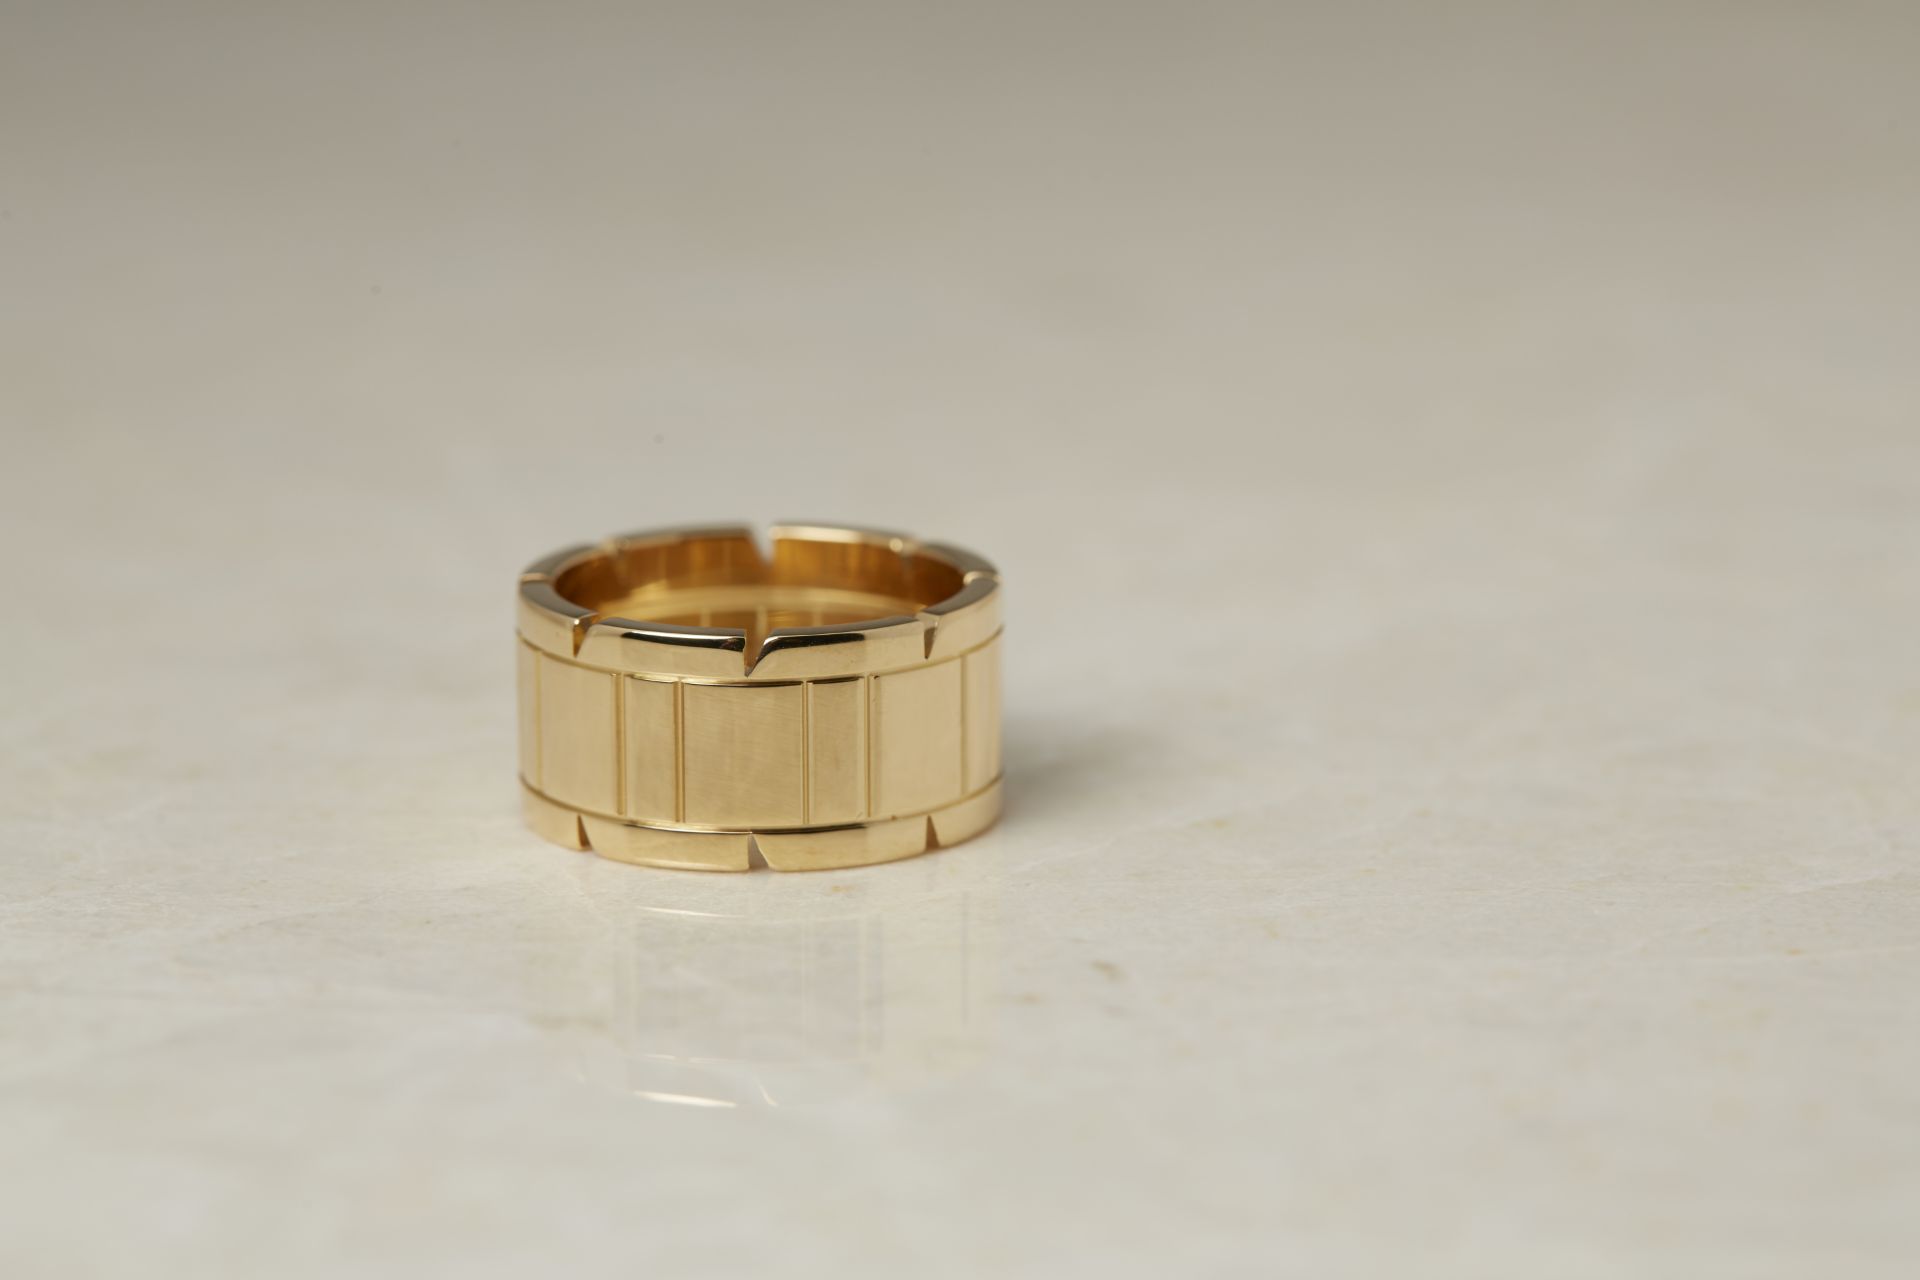 Cartier 18k Yellow Gold Tank Francaise Ring - Image 4 of 8